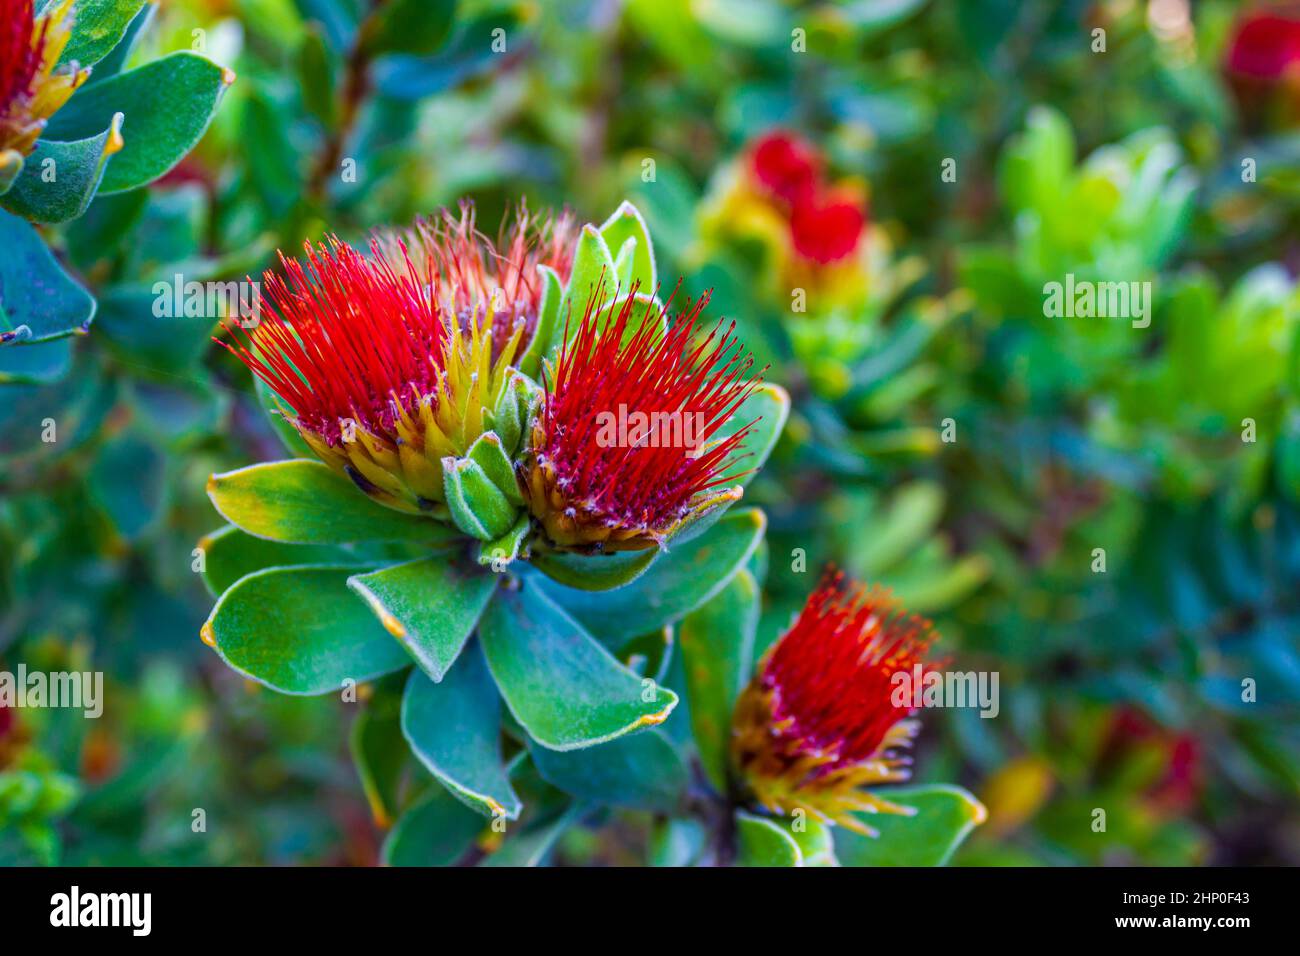 Red yellow flowers plants fynbos ericas in the Kirstenbosch National Botanical Garden, Cape Town, South Africa. Stock Photo